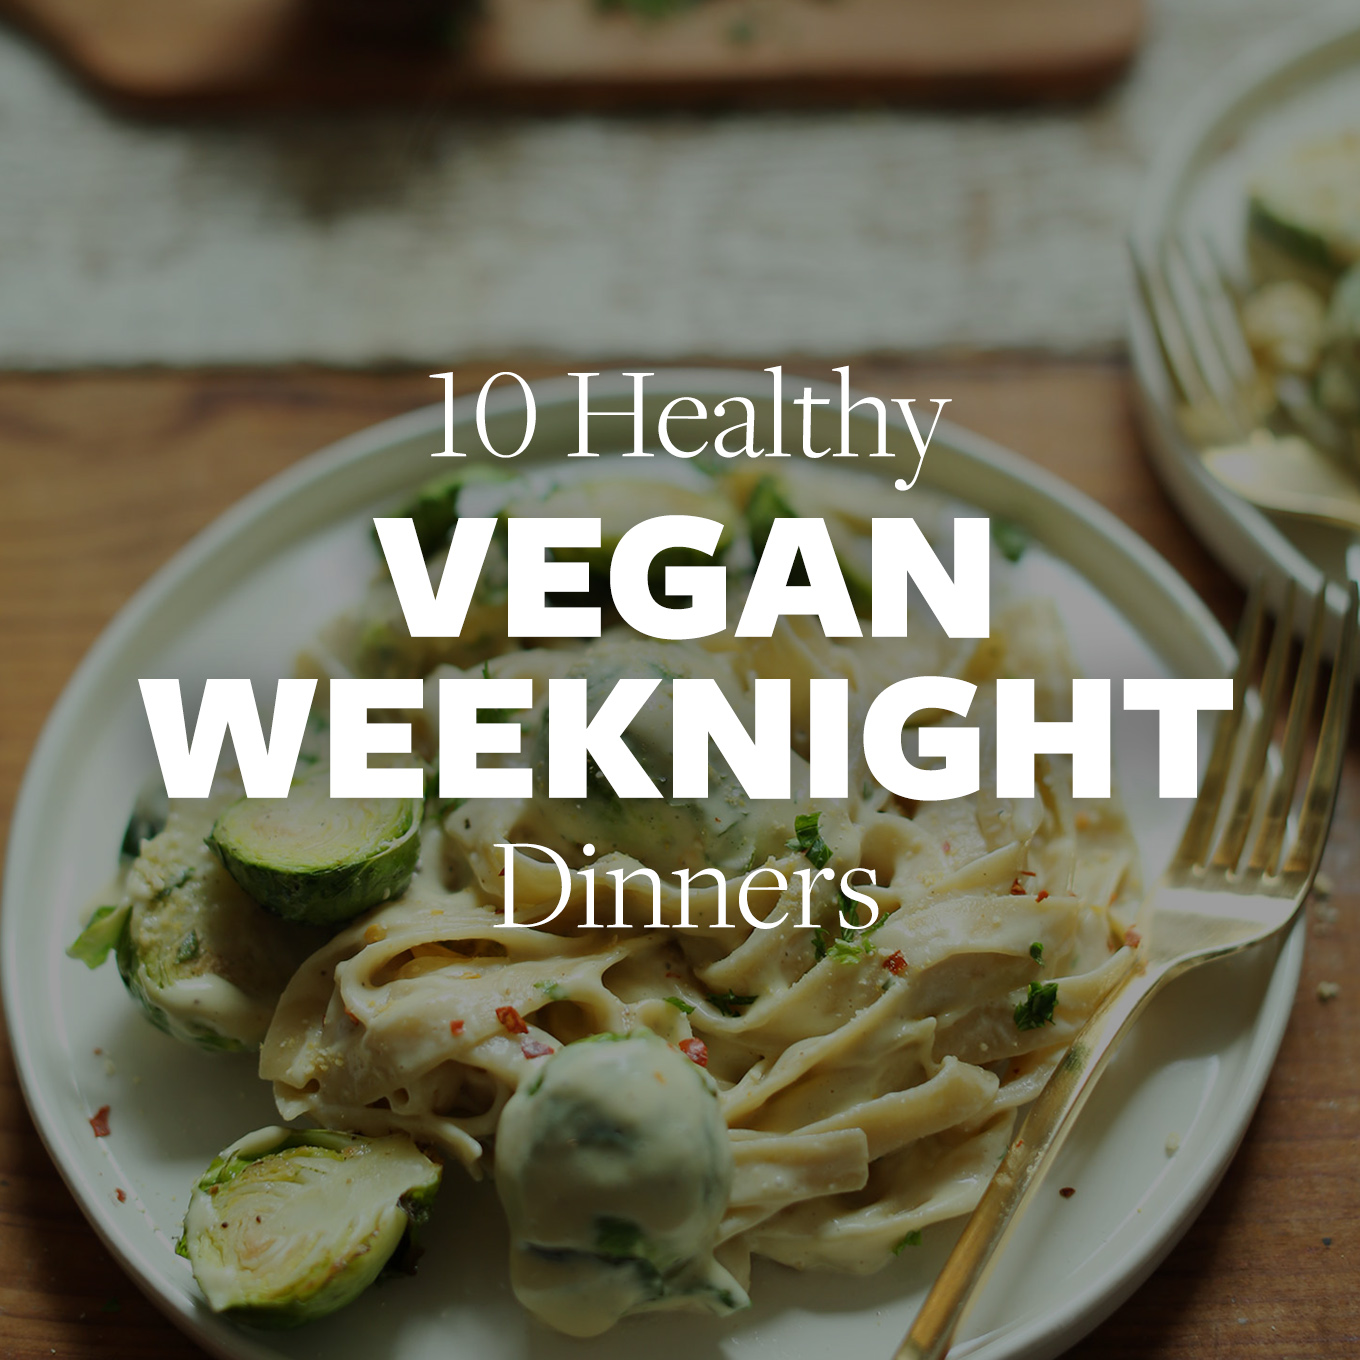 Plate of alfredo for our 10 Healthy Vegan Weeknight Dinners recipe roundup